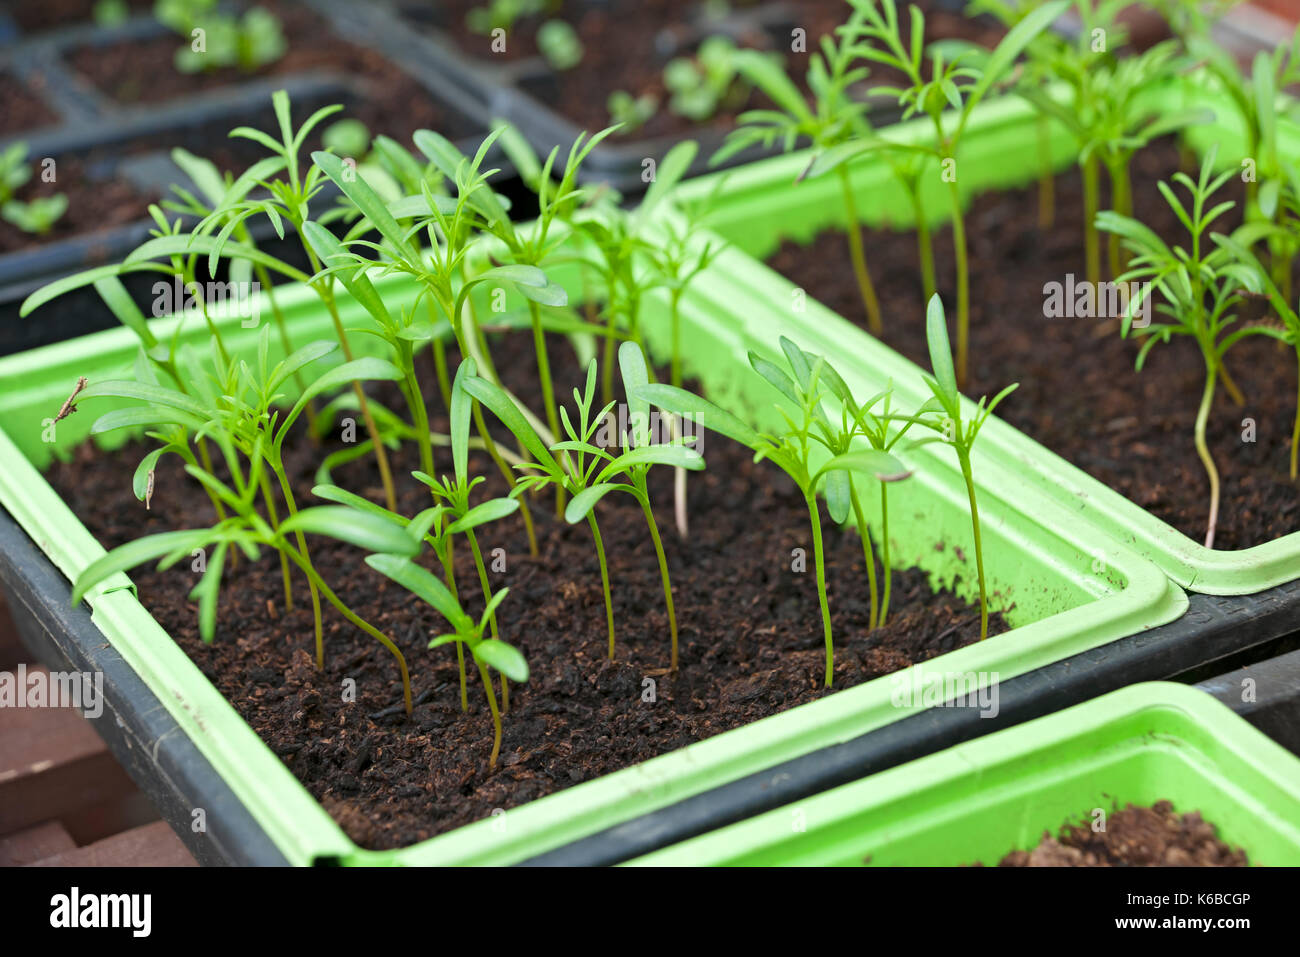 Close up of green young tender cosmos seed seedling seedlings plants in a seed tray growing in a greenhouse England UK United Kingdom GB Great Britain Stock Photo